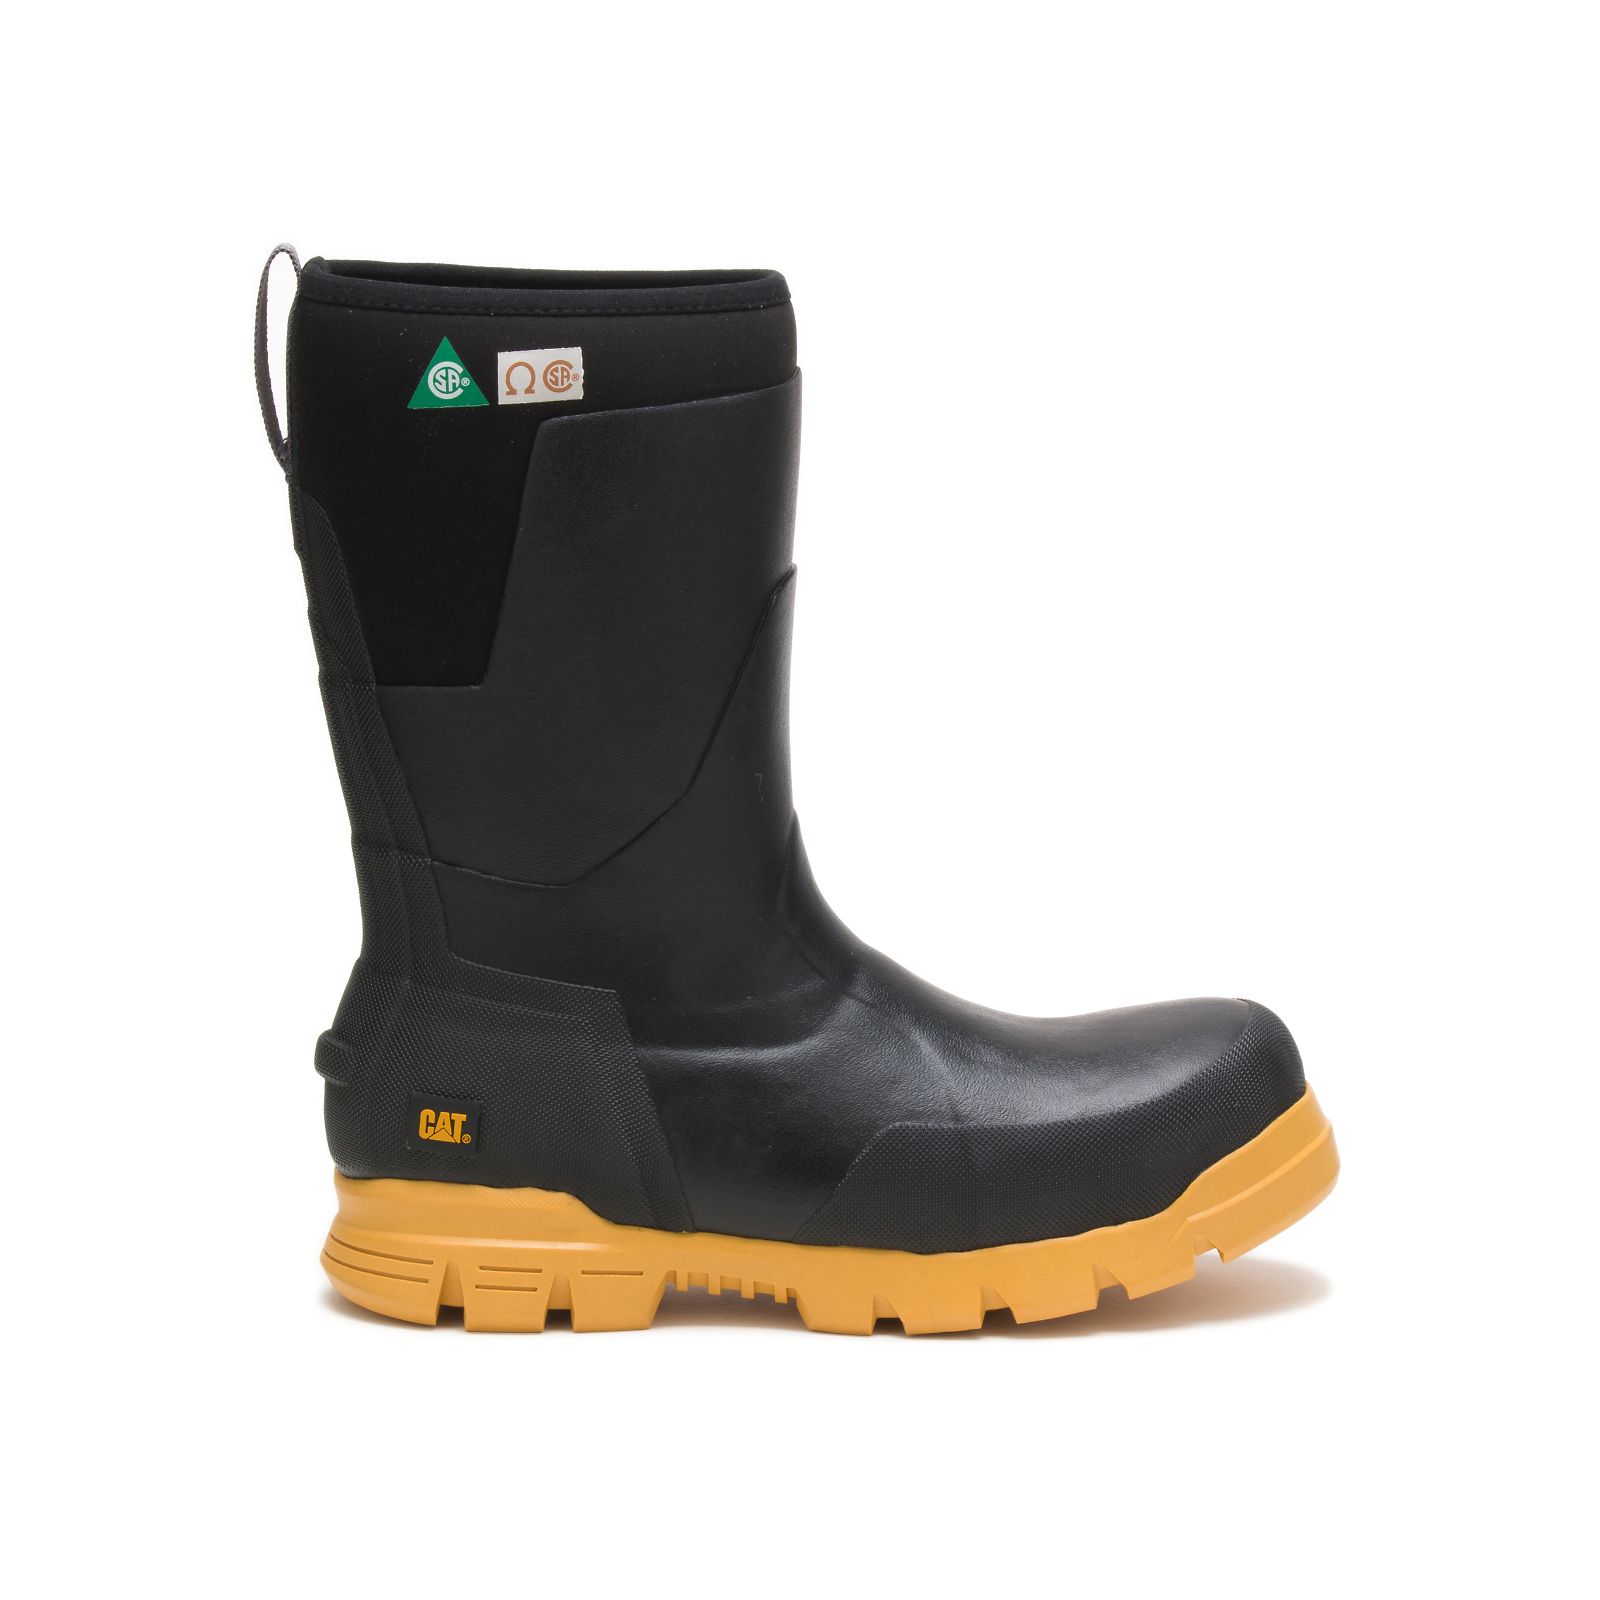 Caterpillar Stormers 11" Steel Toe Csa Philippines - Womens Rubber Boots - Black/Yellow 18642XIKN